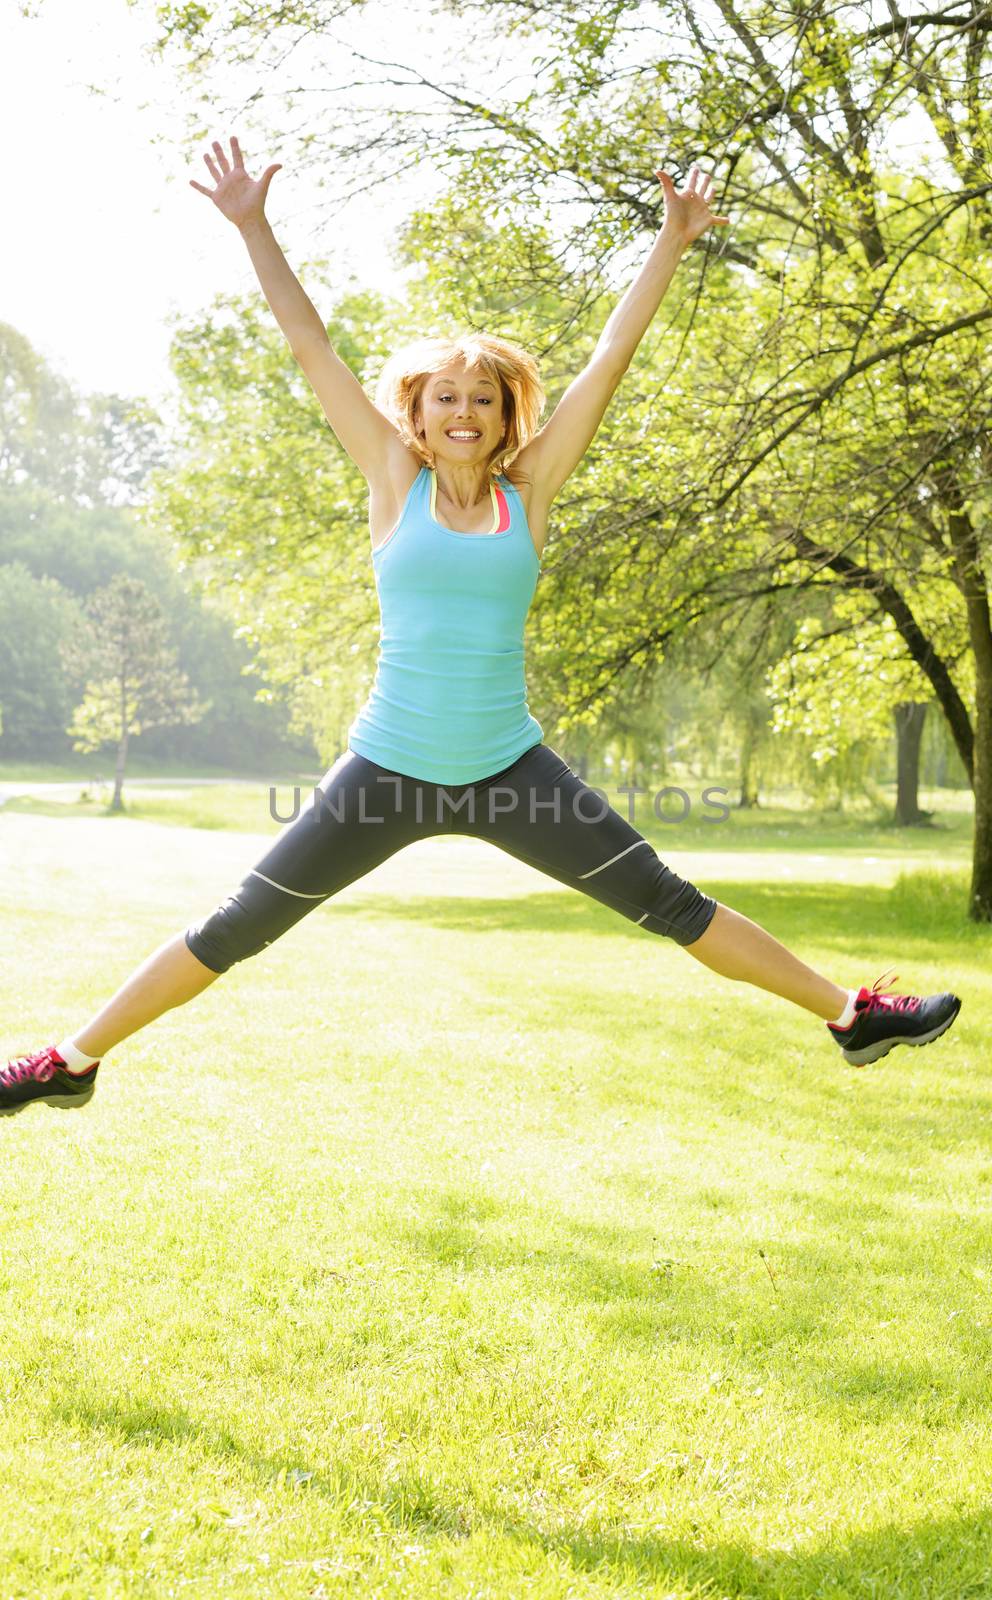 Smiling woman jumping in park by elenathewise